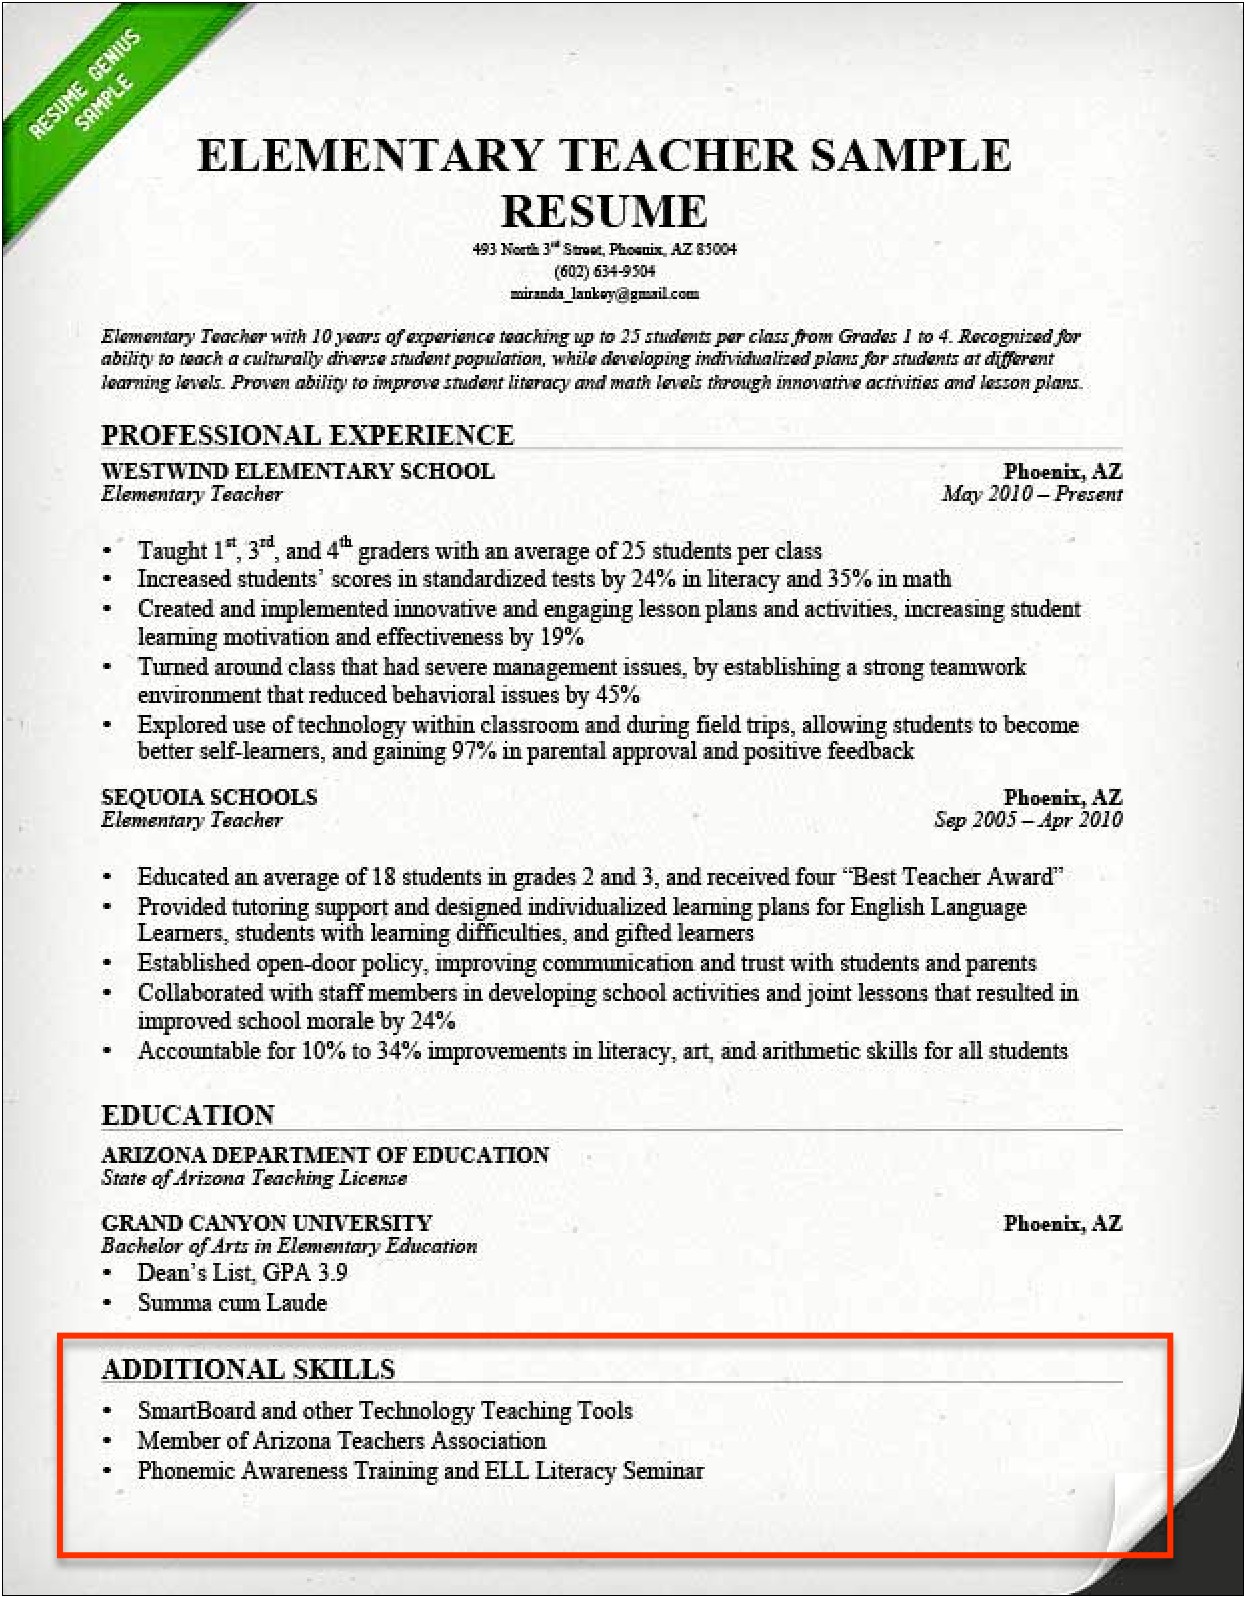 Expale Of Skills To List On Resume